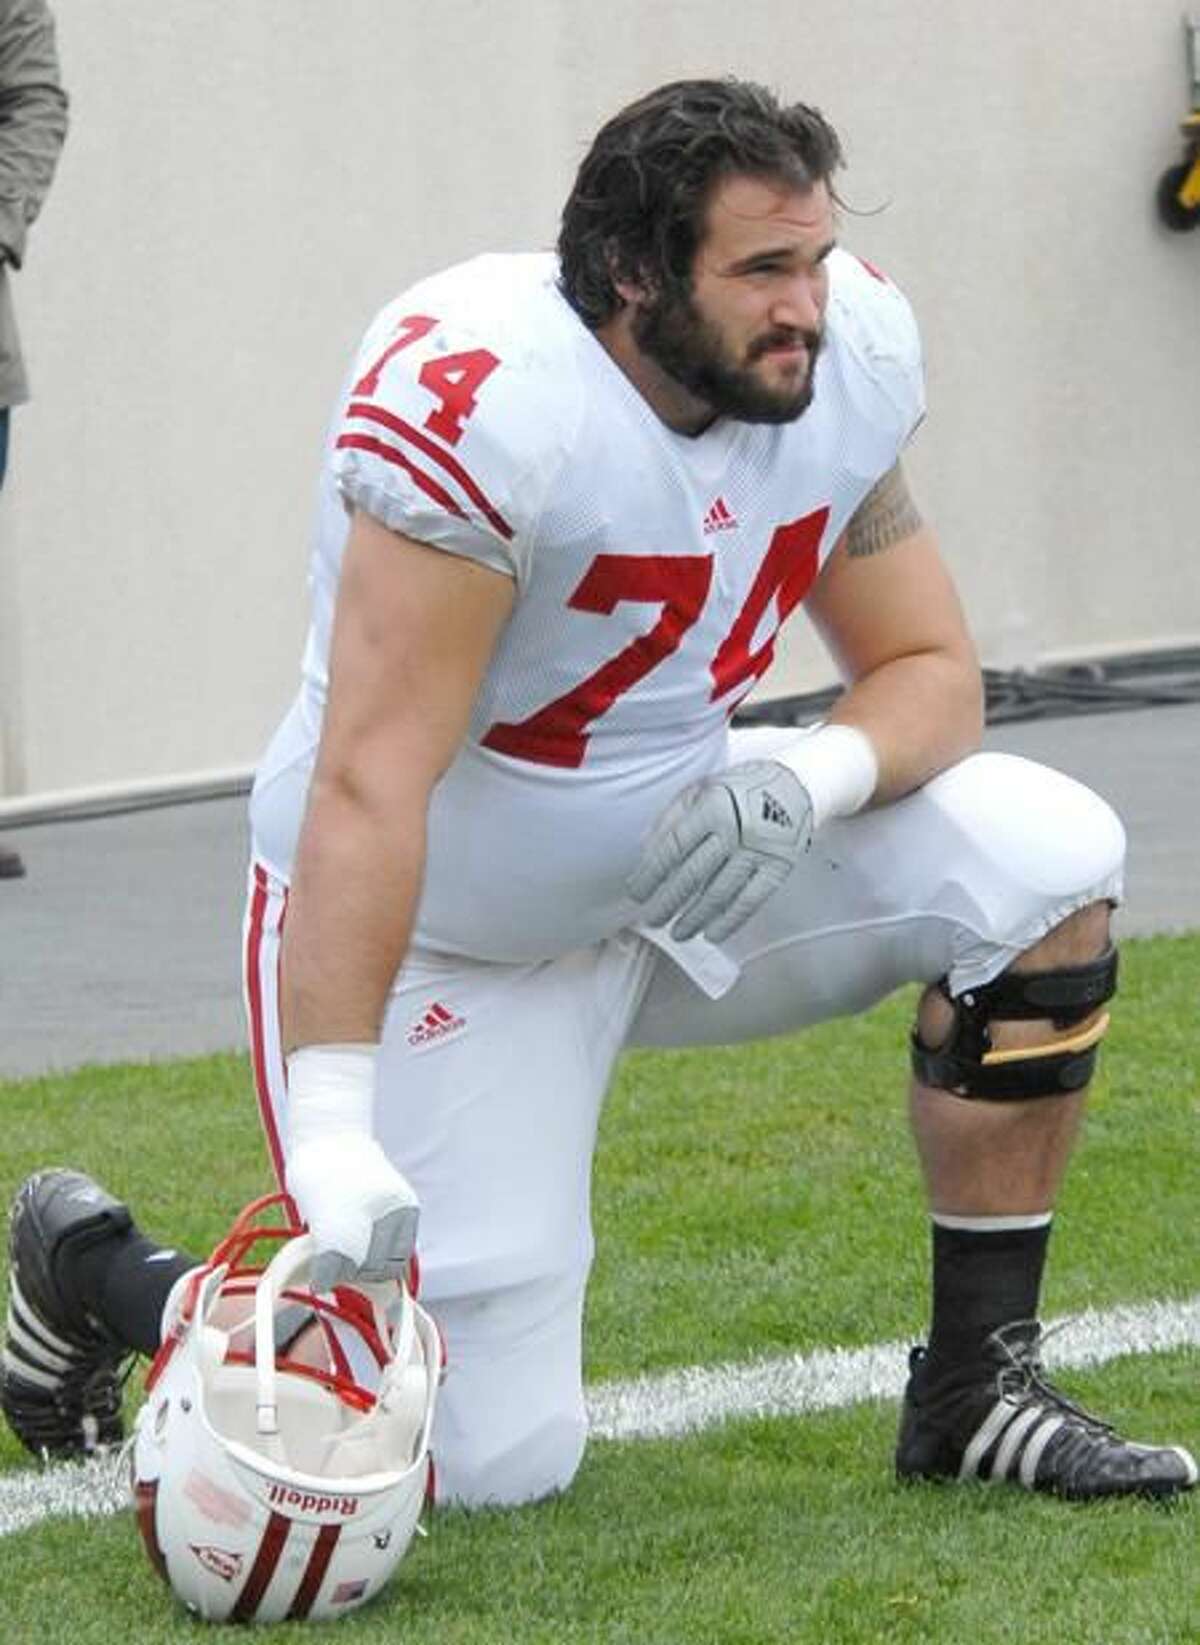 Photo by Bill O'Brien Wisconsin lineman John Moffitt of Guilford, and a Notre Dame-West Haven graduate, is expected to be selected in the upcoming NFL Draft.